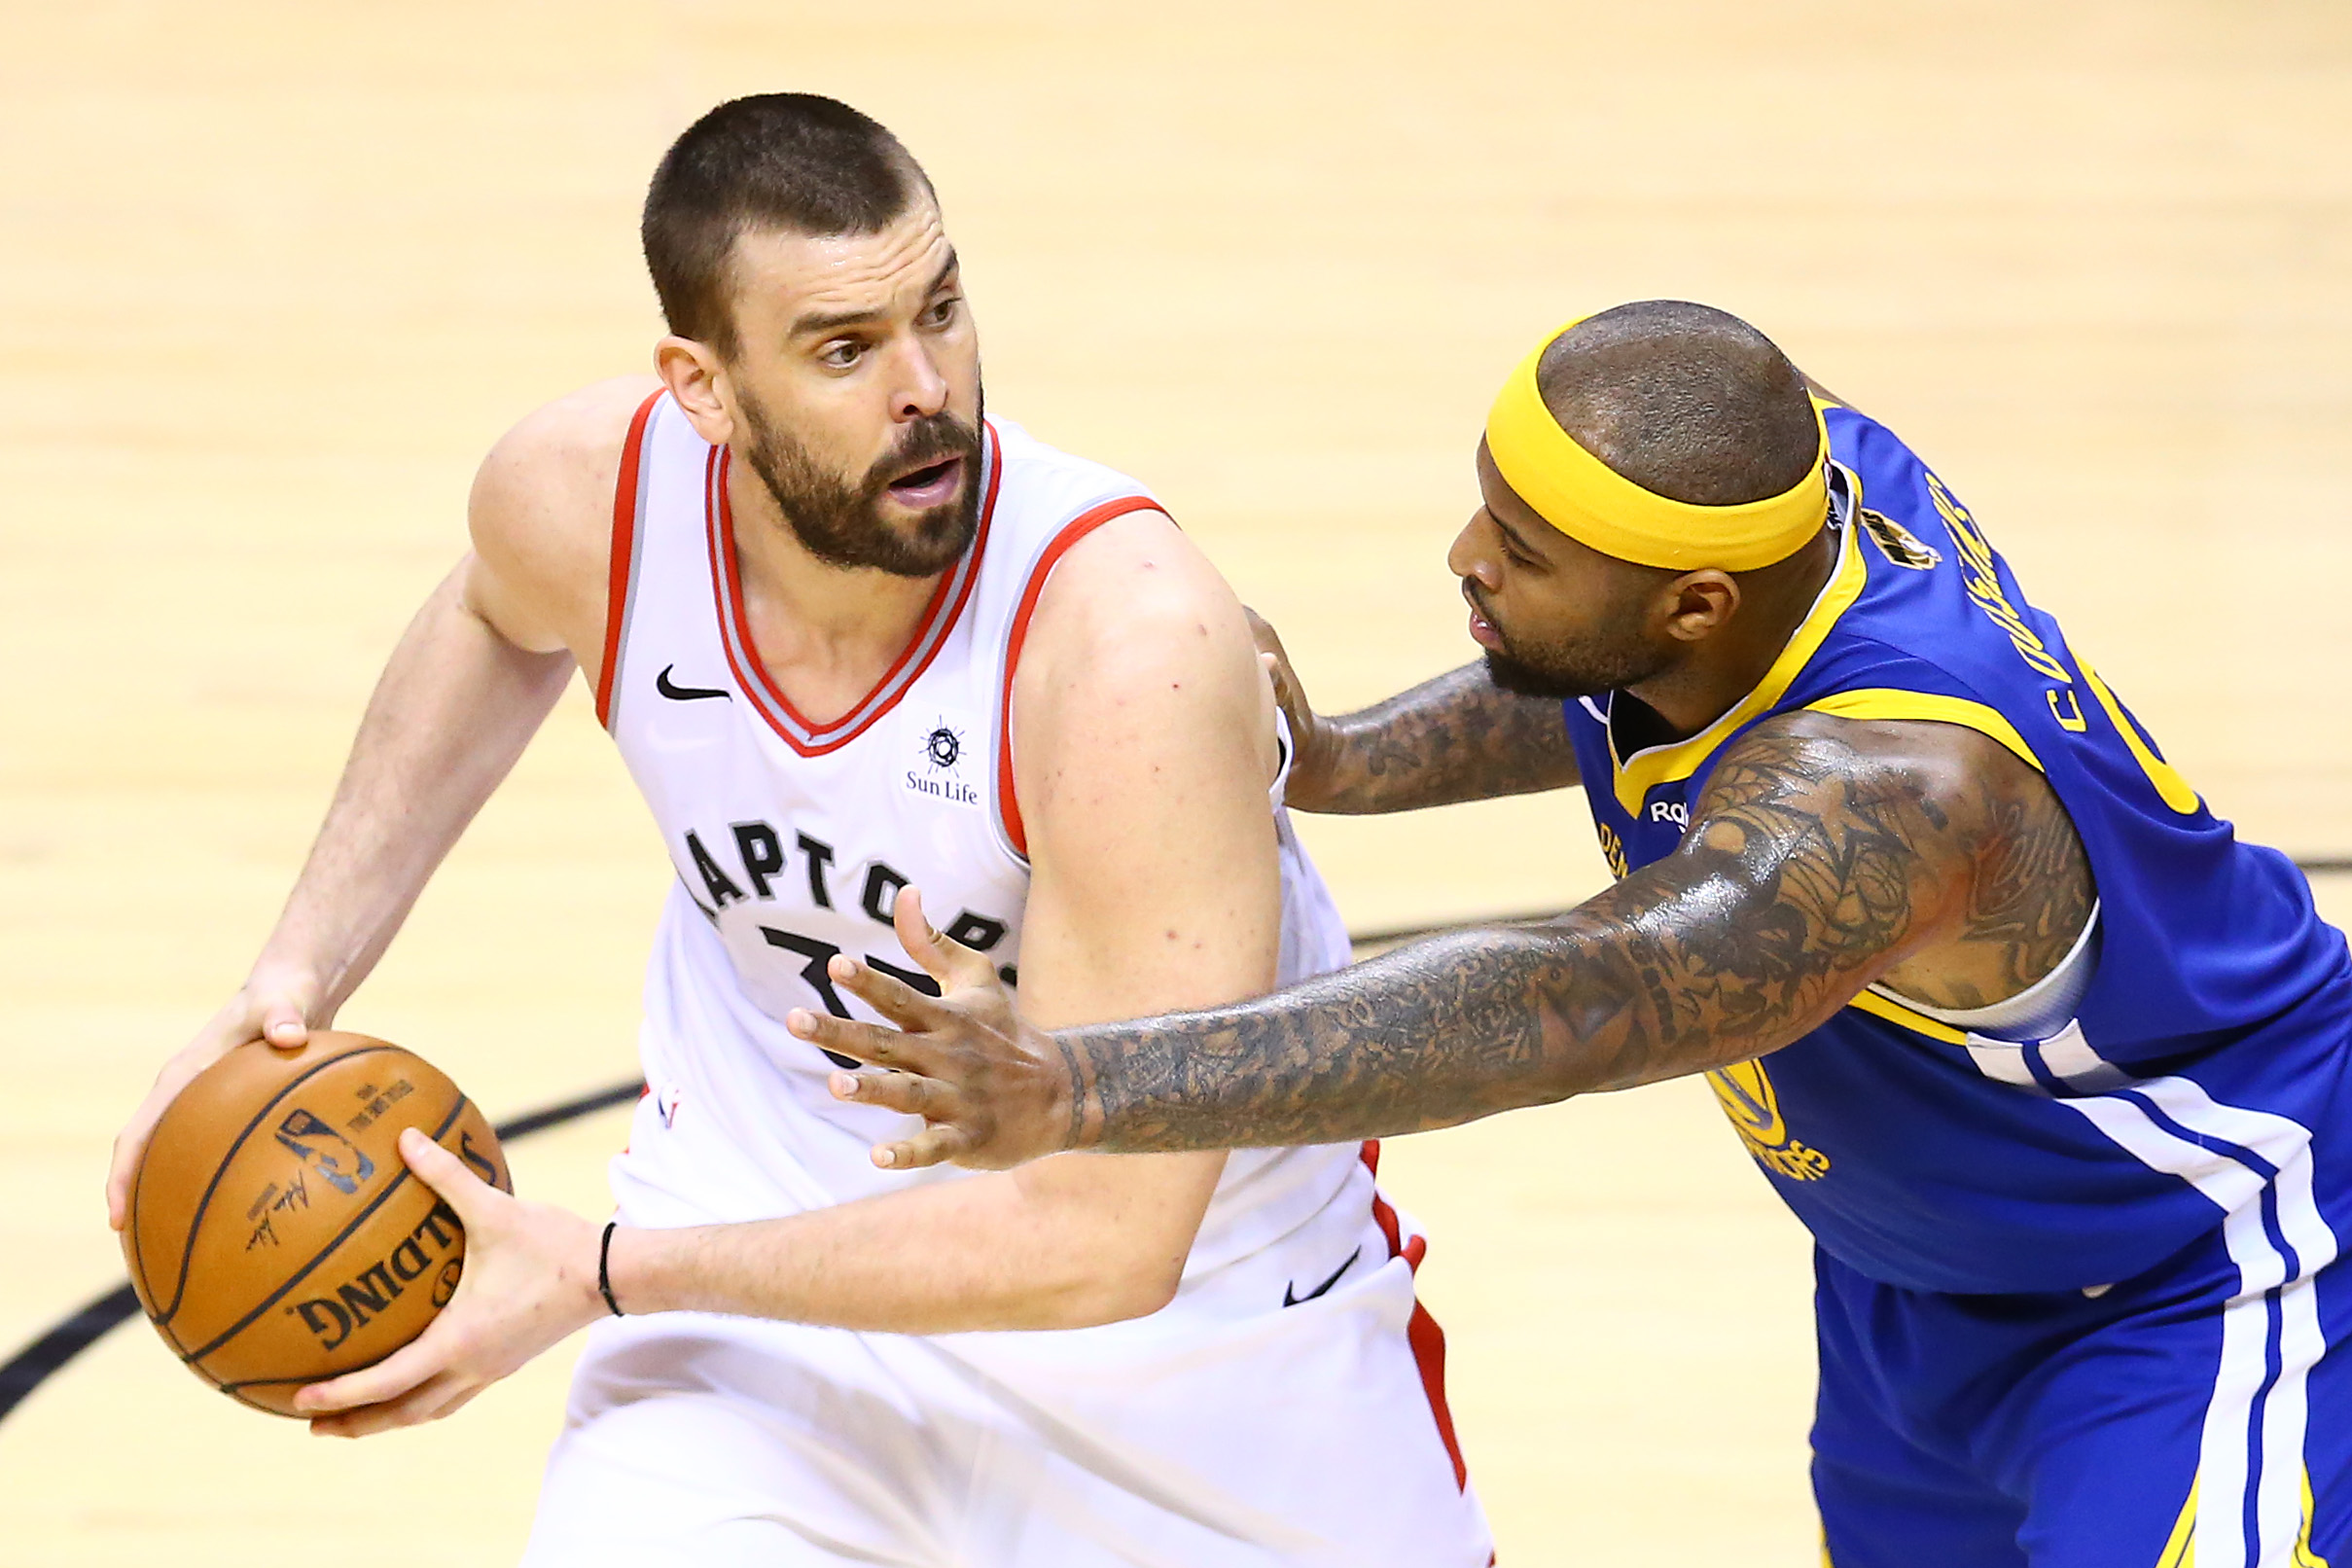 Marc Gasol #33 of the Toronto Raptors (left) and DeMarcus Cousins #0 of the Golden State Warriors (right).